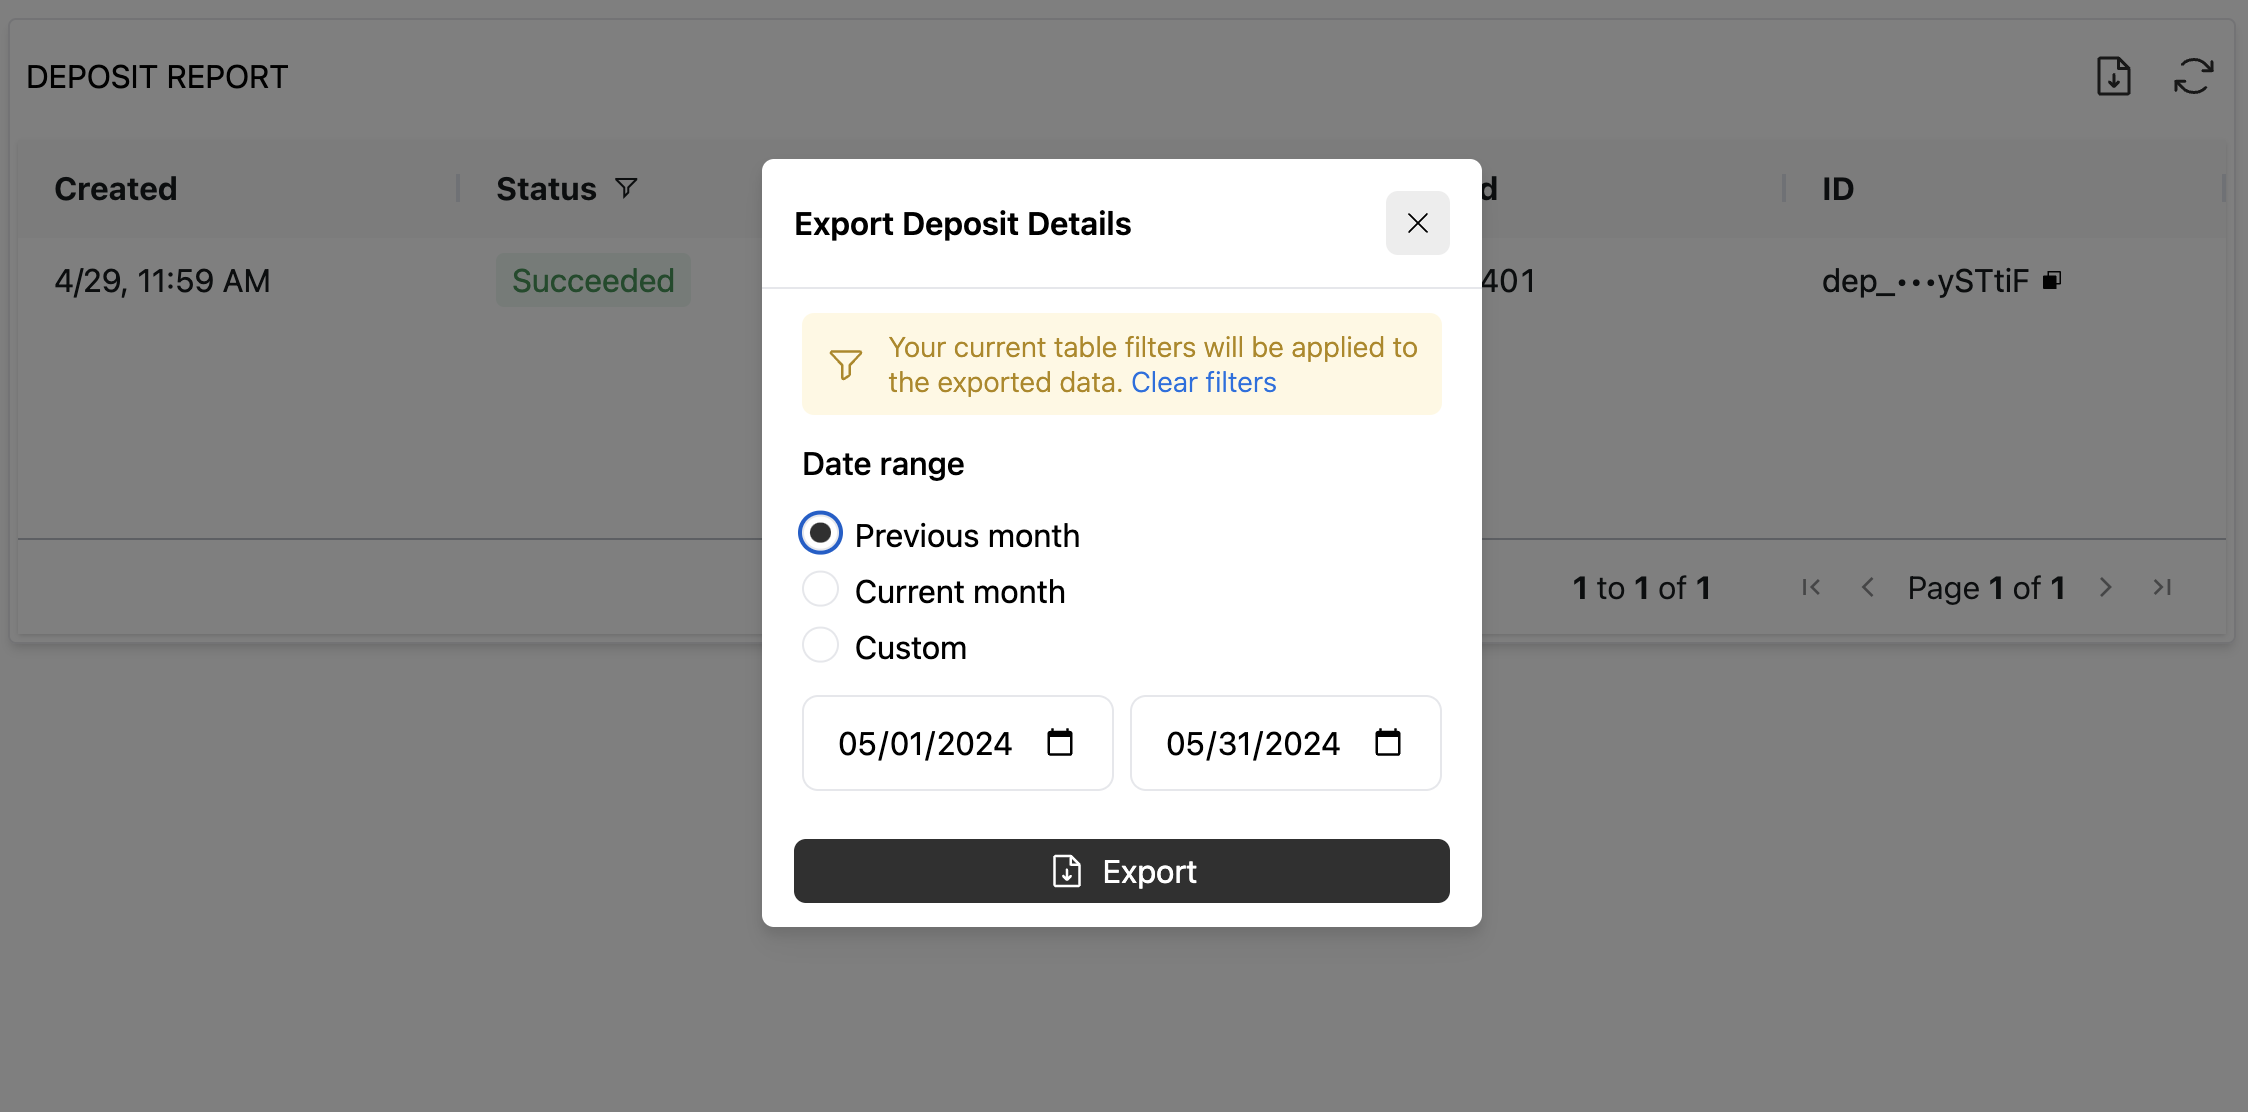 Any filters will be applied to the deposits activity report export